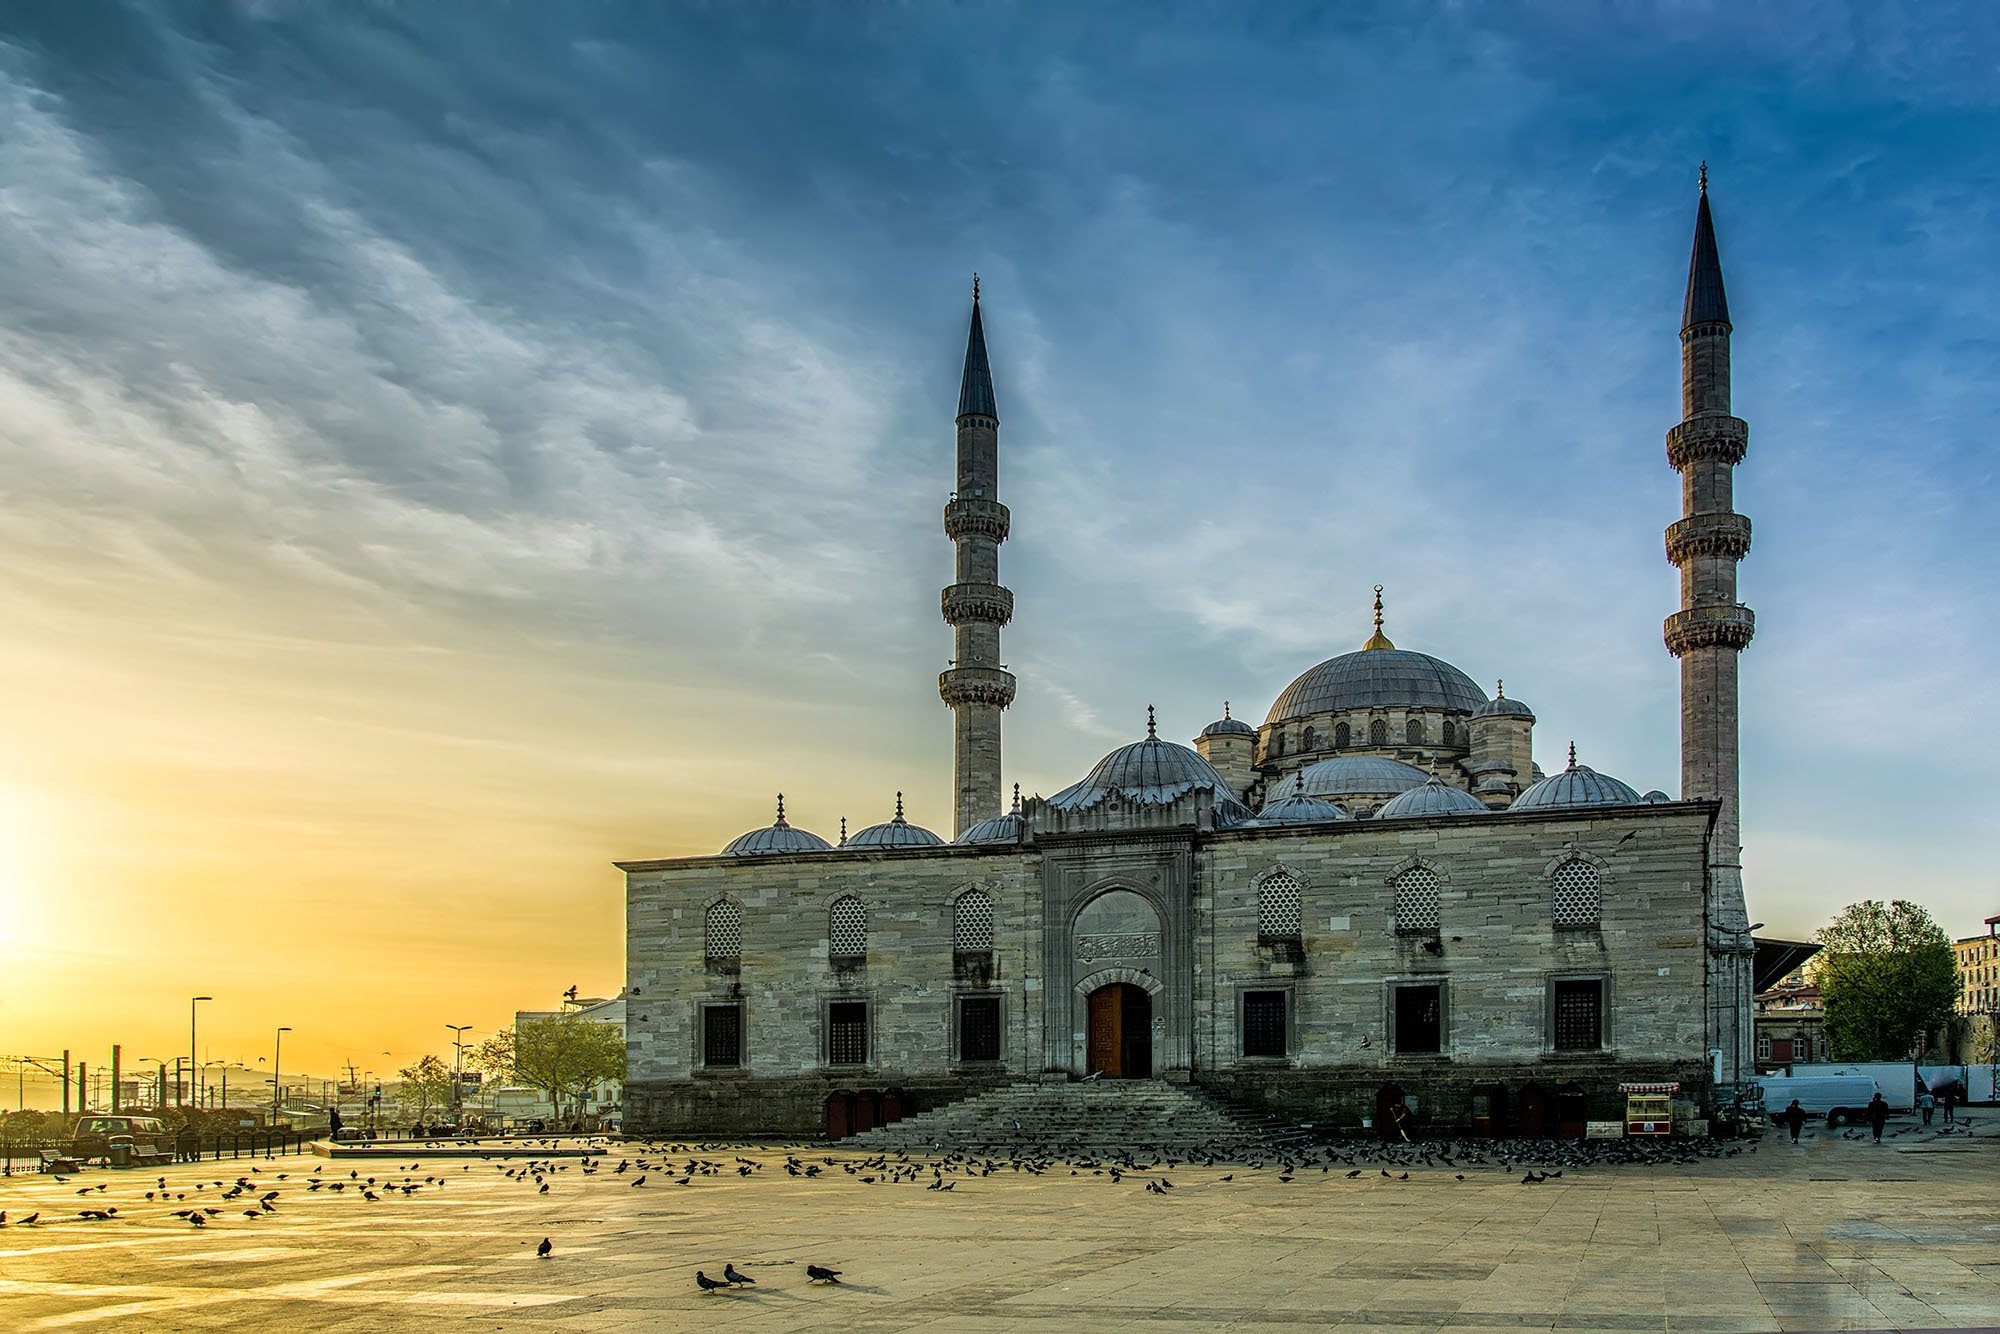  The New Mosque (Yeni Cami) at sunrise in Eminönü district of Istanbul, Turkey.